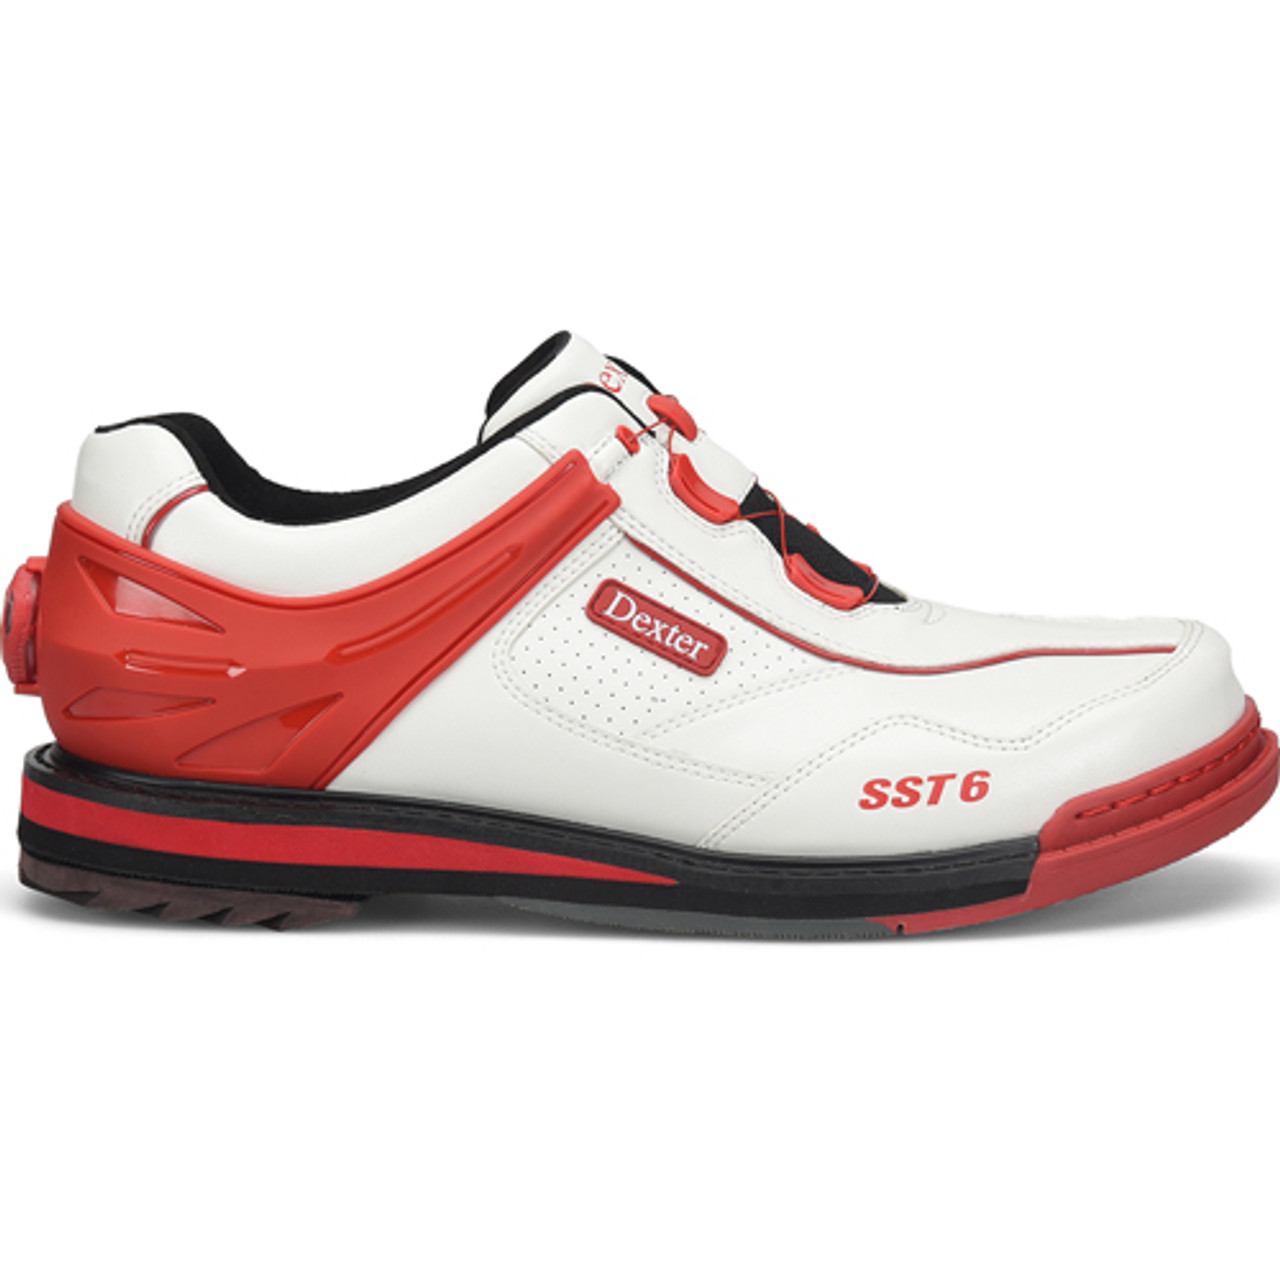 Dexter Mens SST 6 Hybrid BOA White & Red Bowling Shoes - Right Hand ...